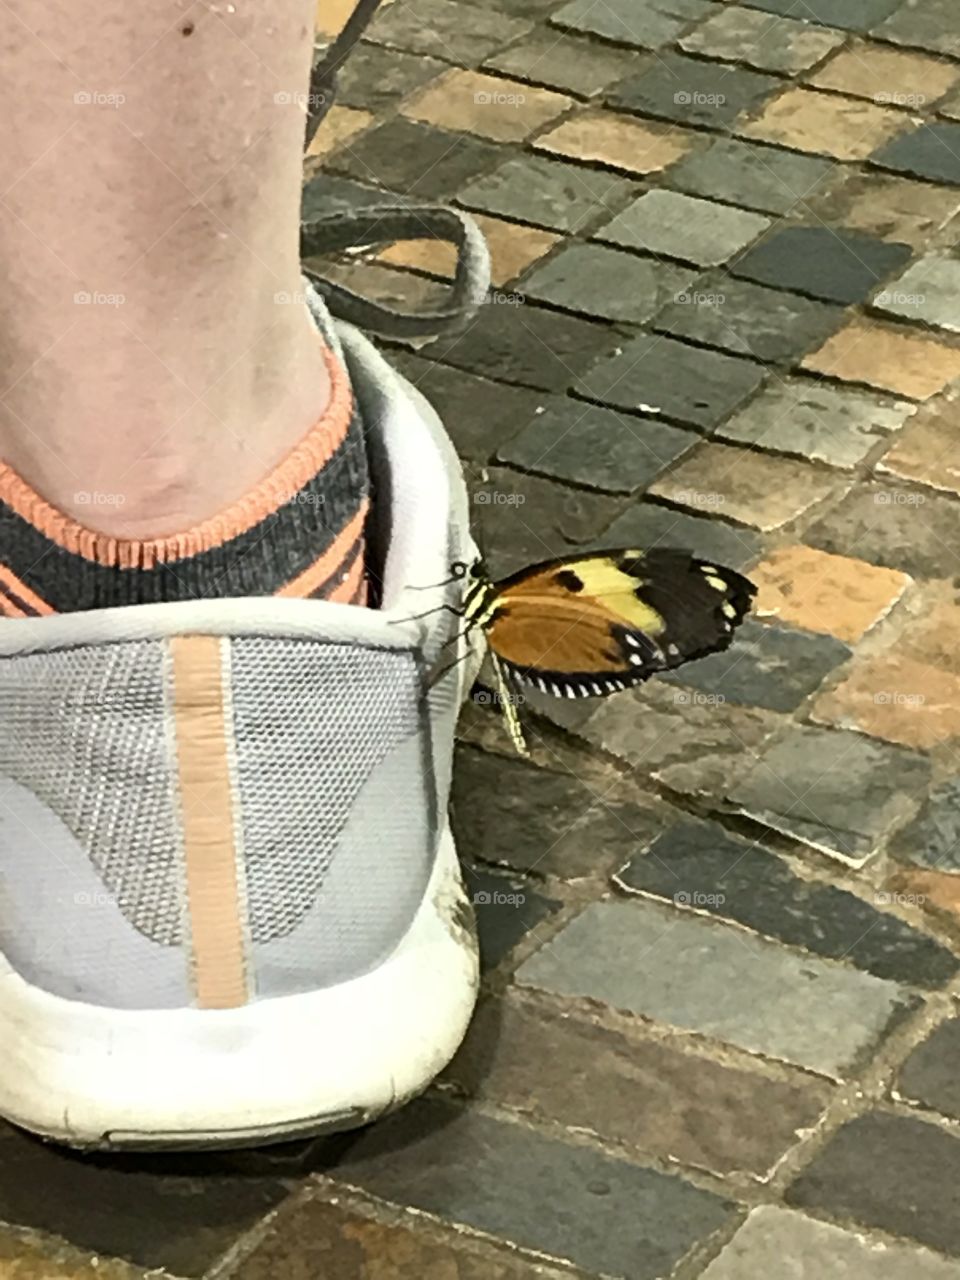 At a butterfly garden this little beauty landed on the shoe of one of the girls in our group and just hung out there for awhile.